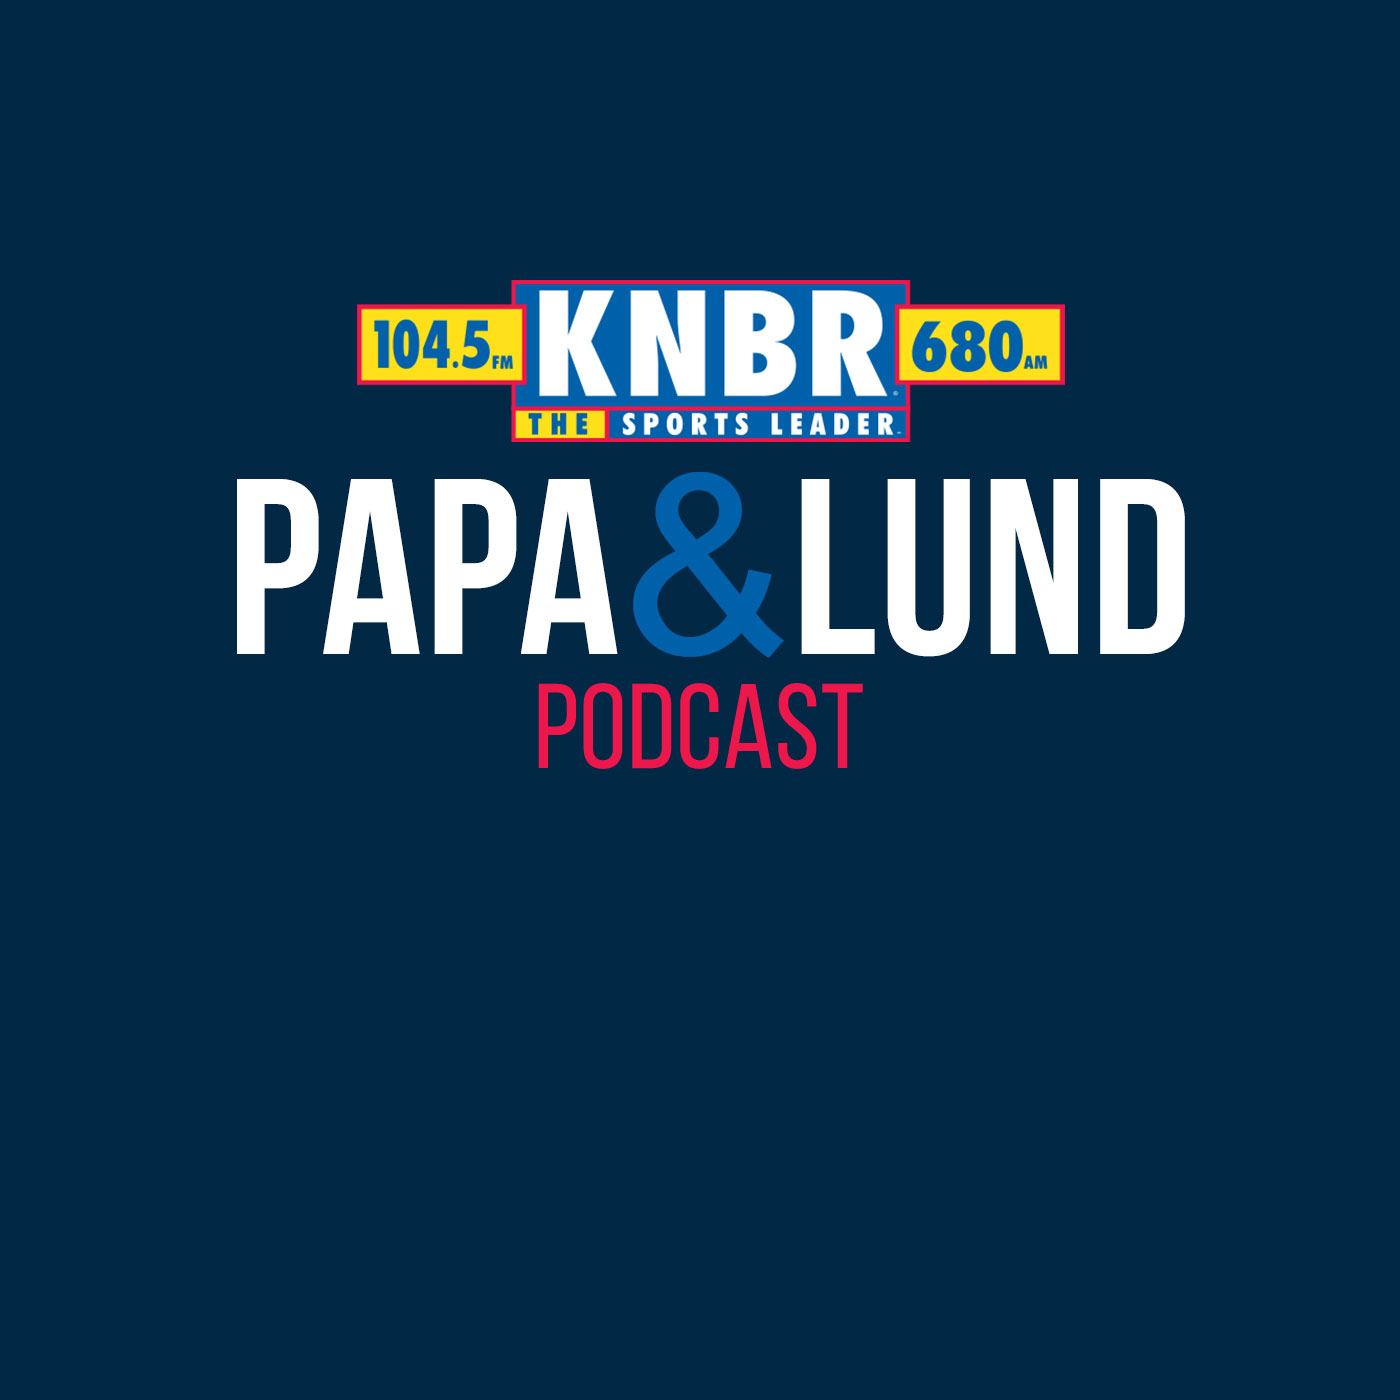 5-19 Chris Rose joins Papa & Lund to discuss the youth movement of the San Francisco Giants as well as remember the life of Jim Brown